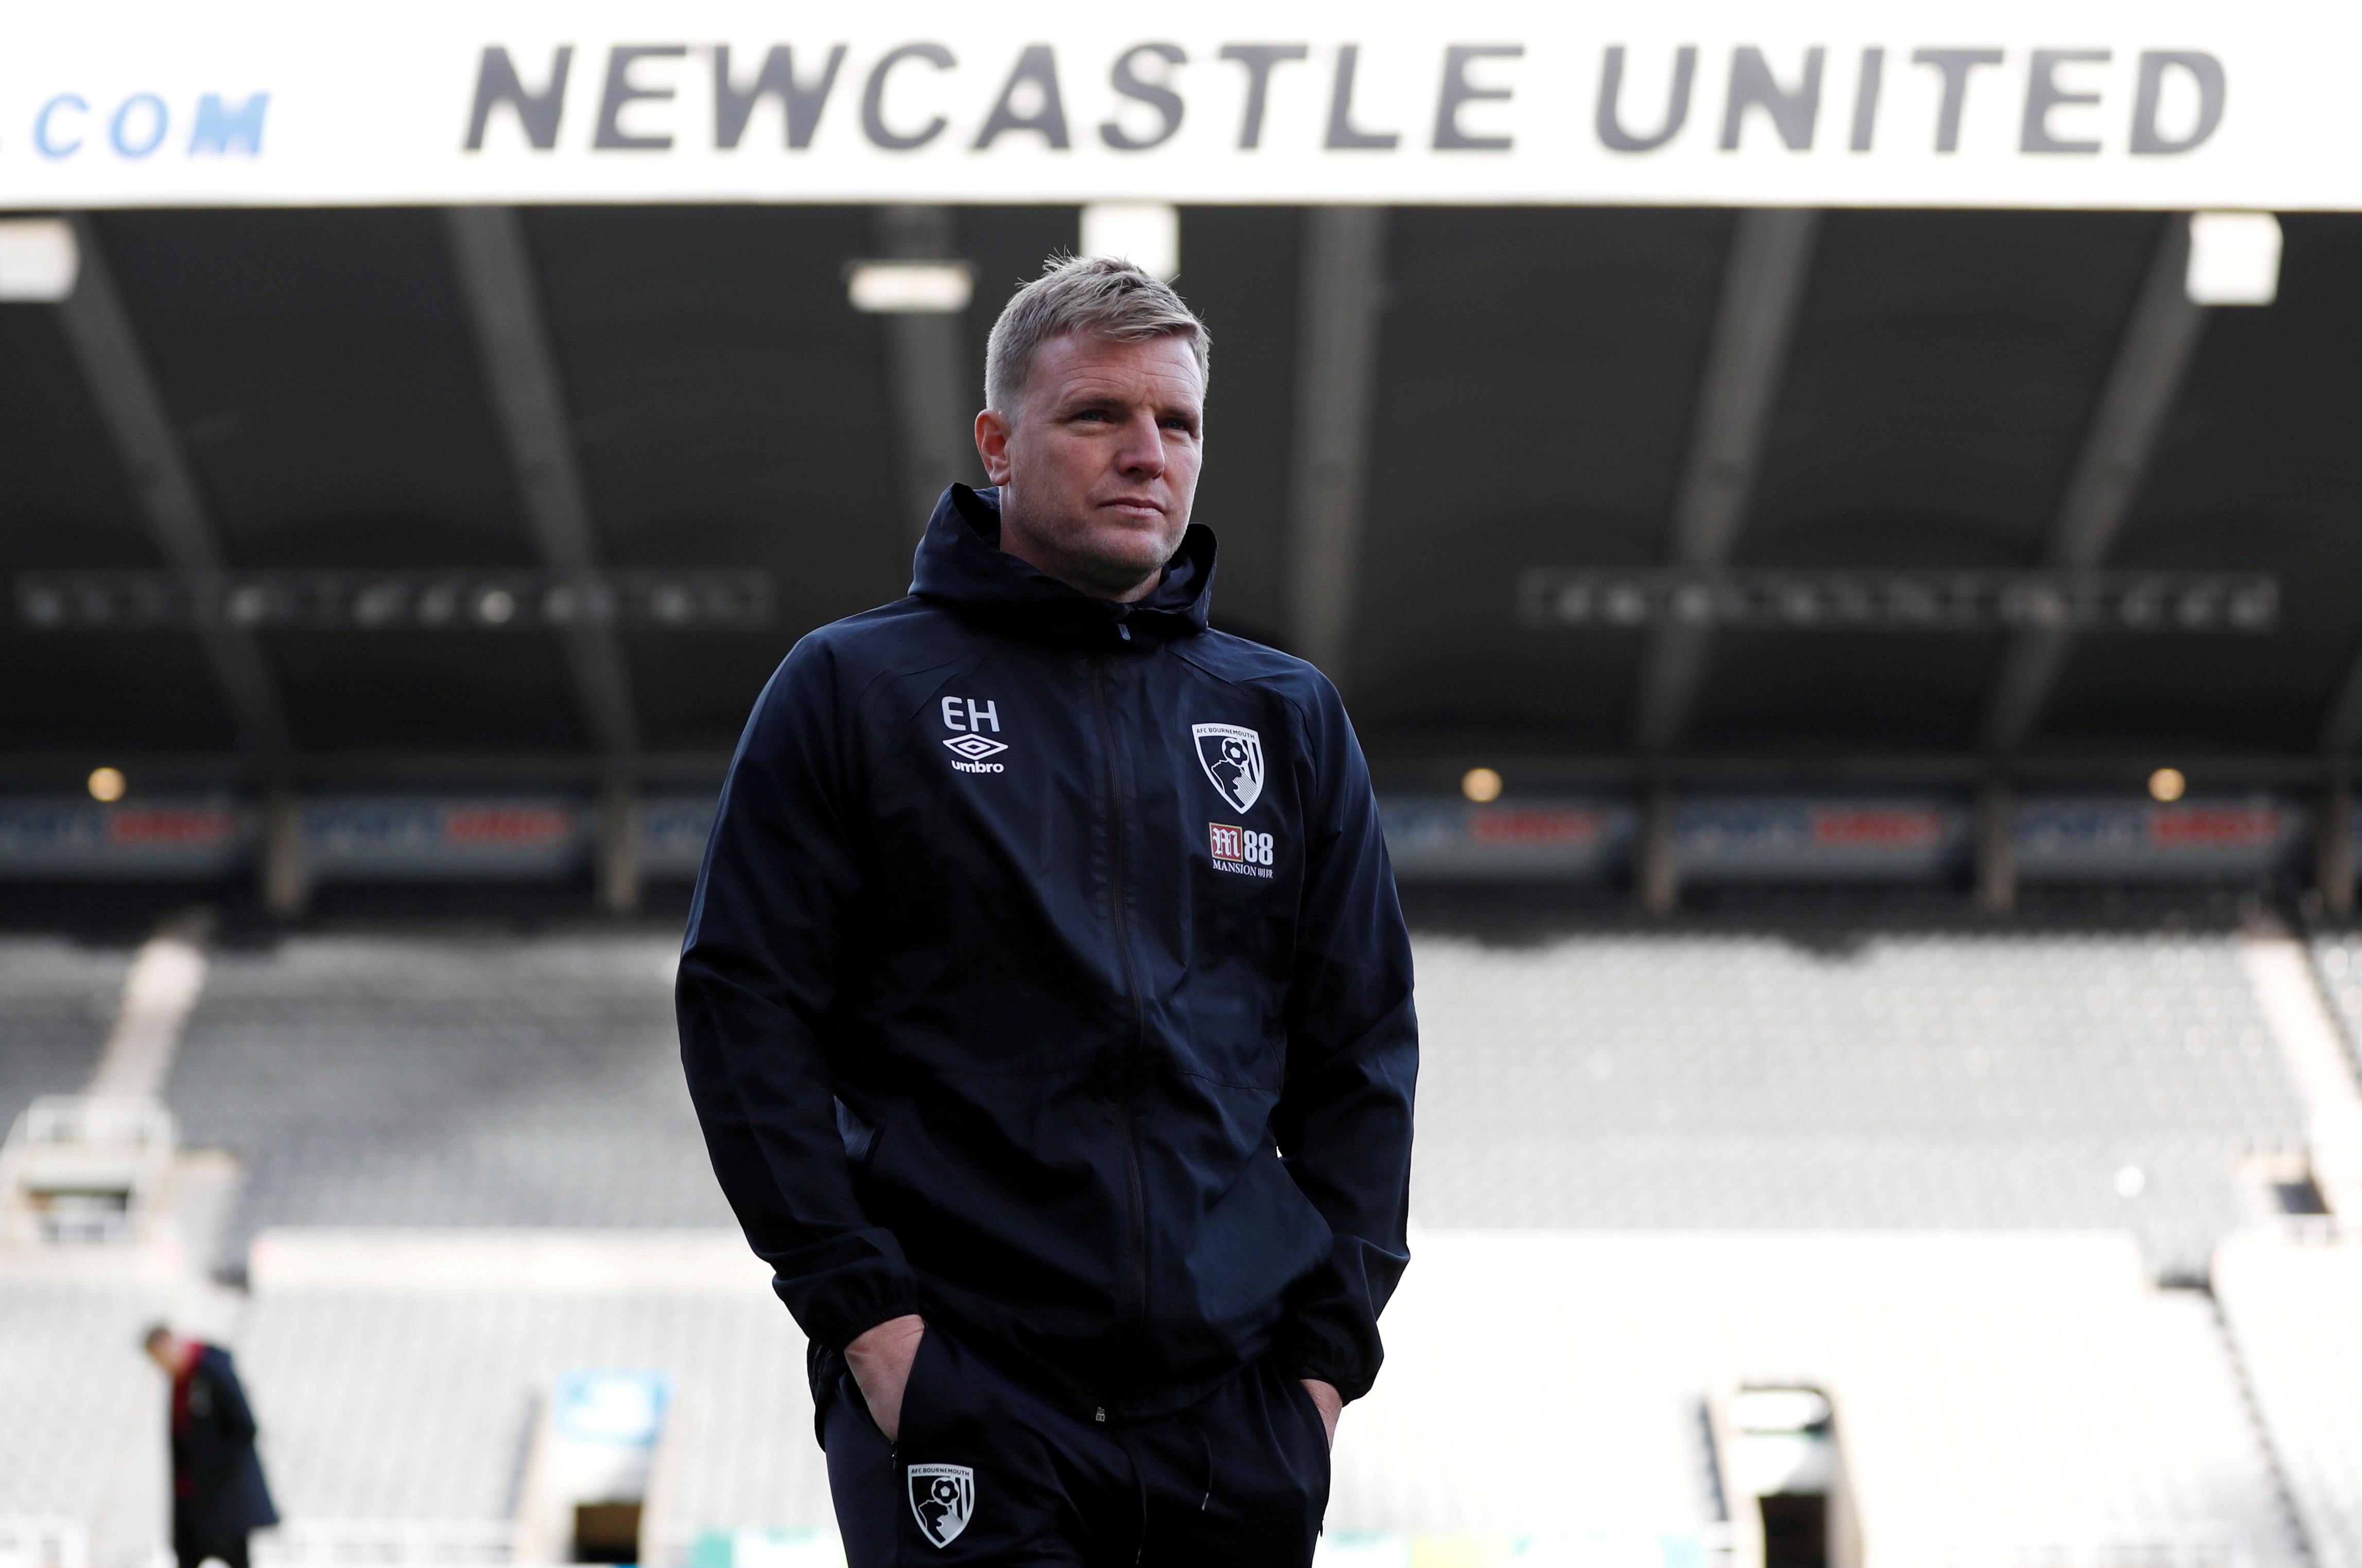 Soccer Football - Premier League - Newcastle United v AFC Bournemouth - St James' Park, Newcastle, Britain - November 9, 2019   Bournemouth manager Eddie Howe before the match    Action Images via Reuters/Lee Smith/File Photo    